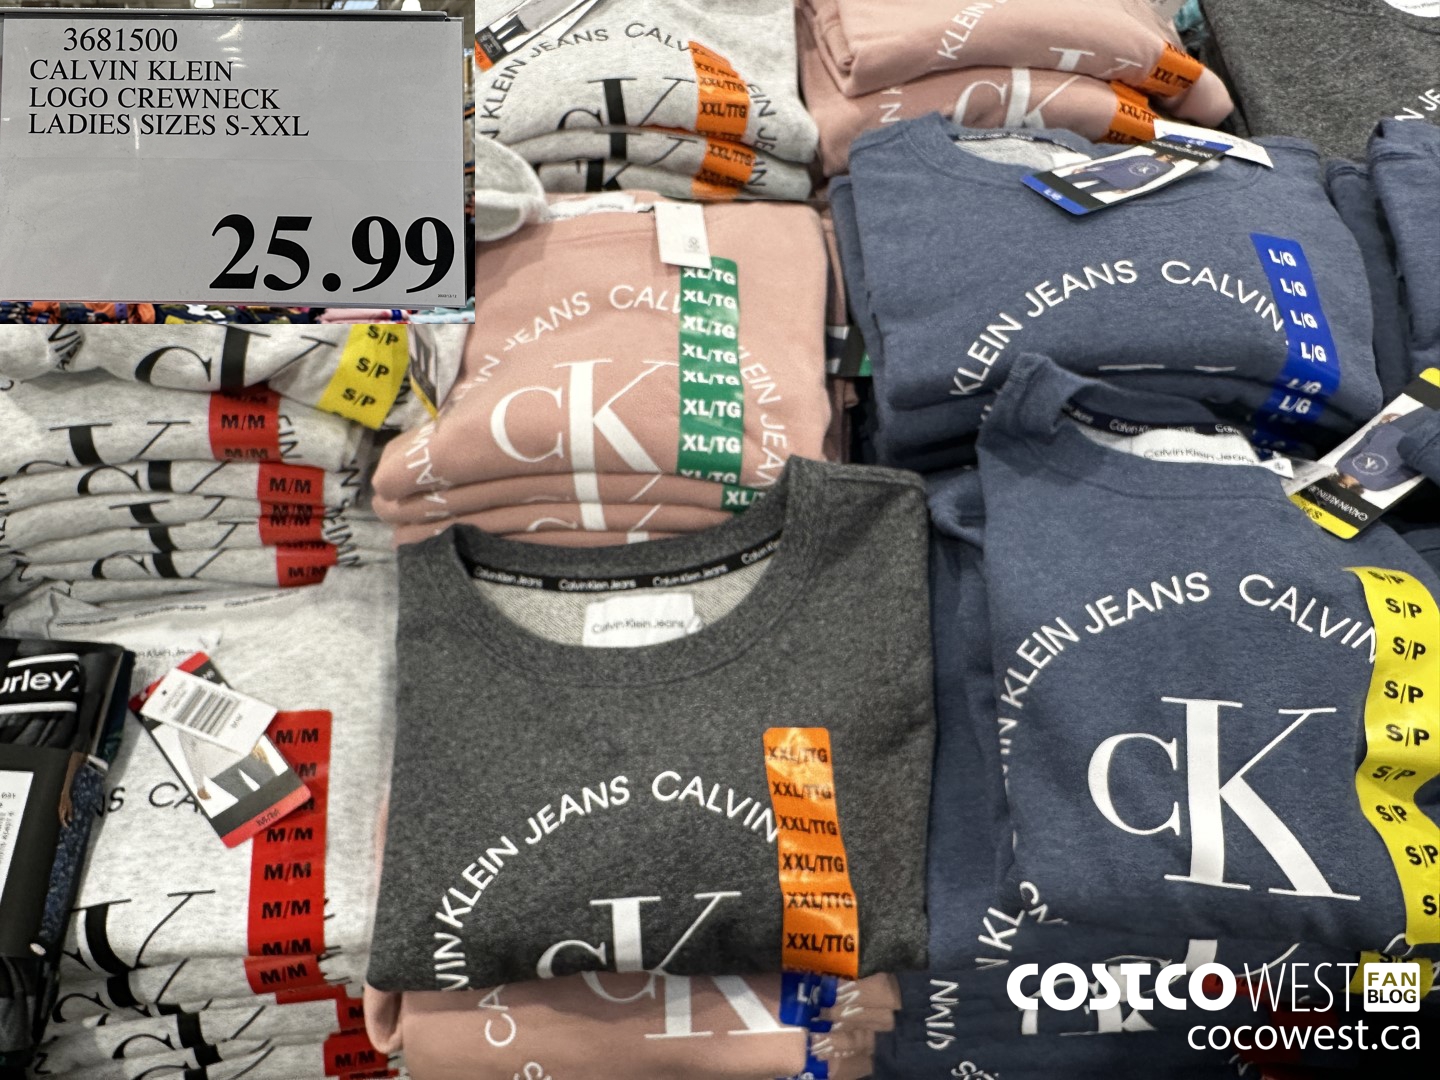 Costco Fall Superpost – The Entire Clothing Section - Sweaters, Jackets and Boots! - Costco West Fan Blog